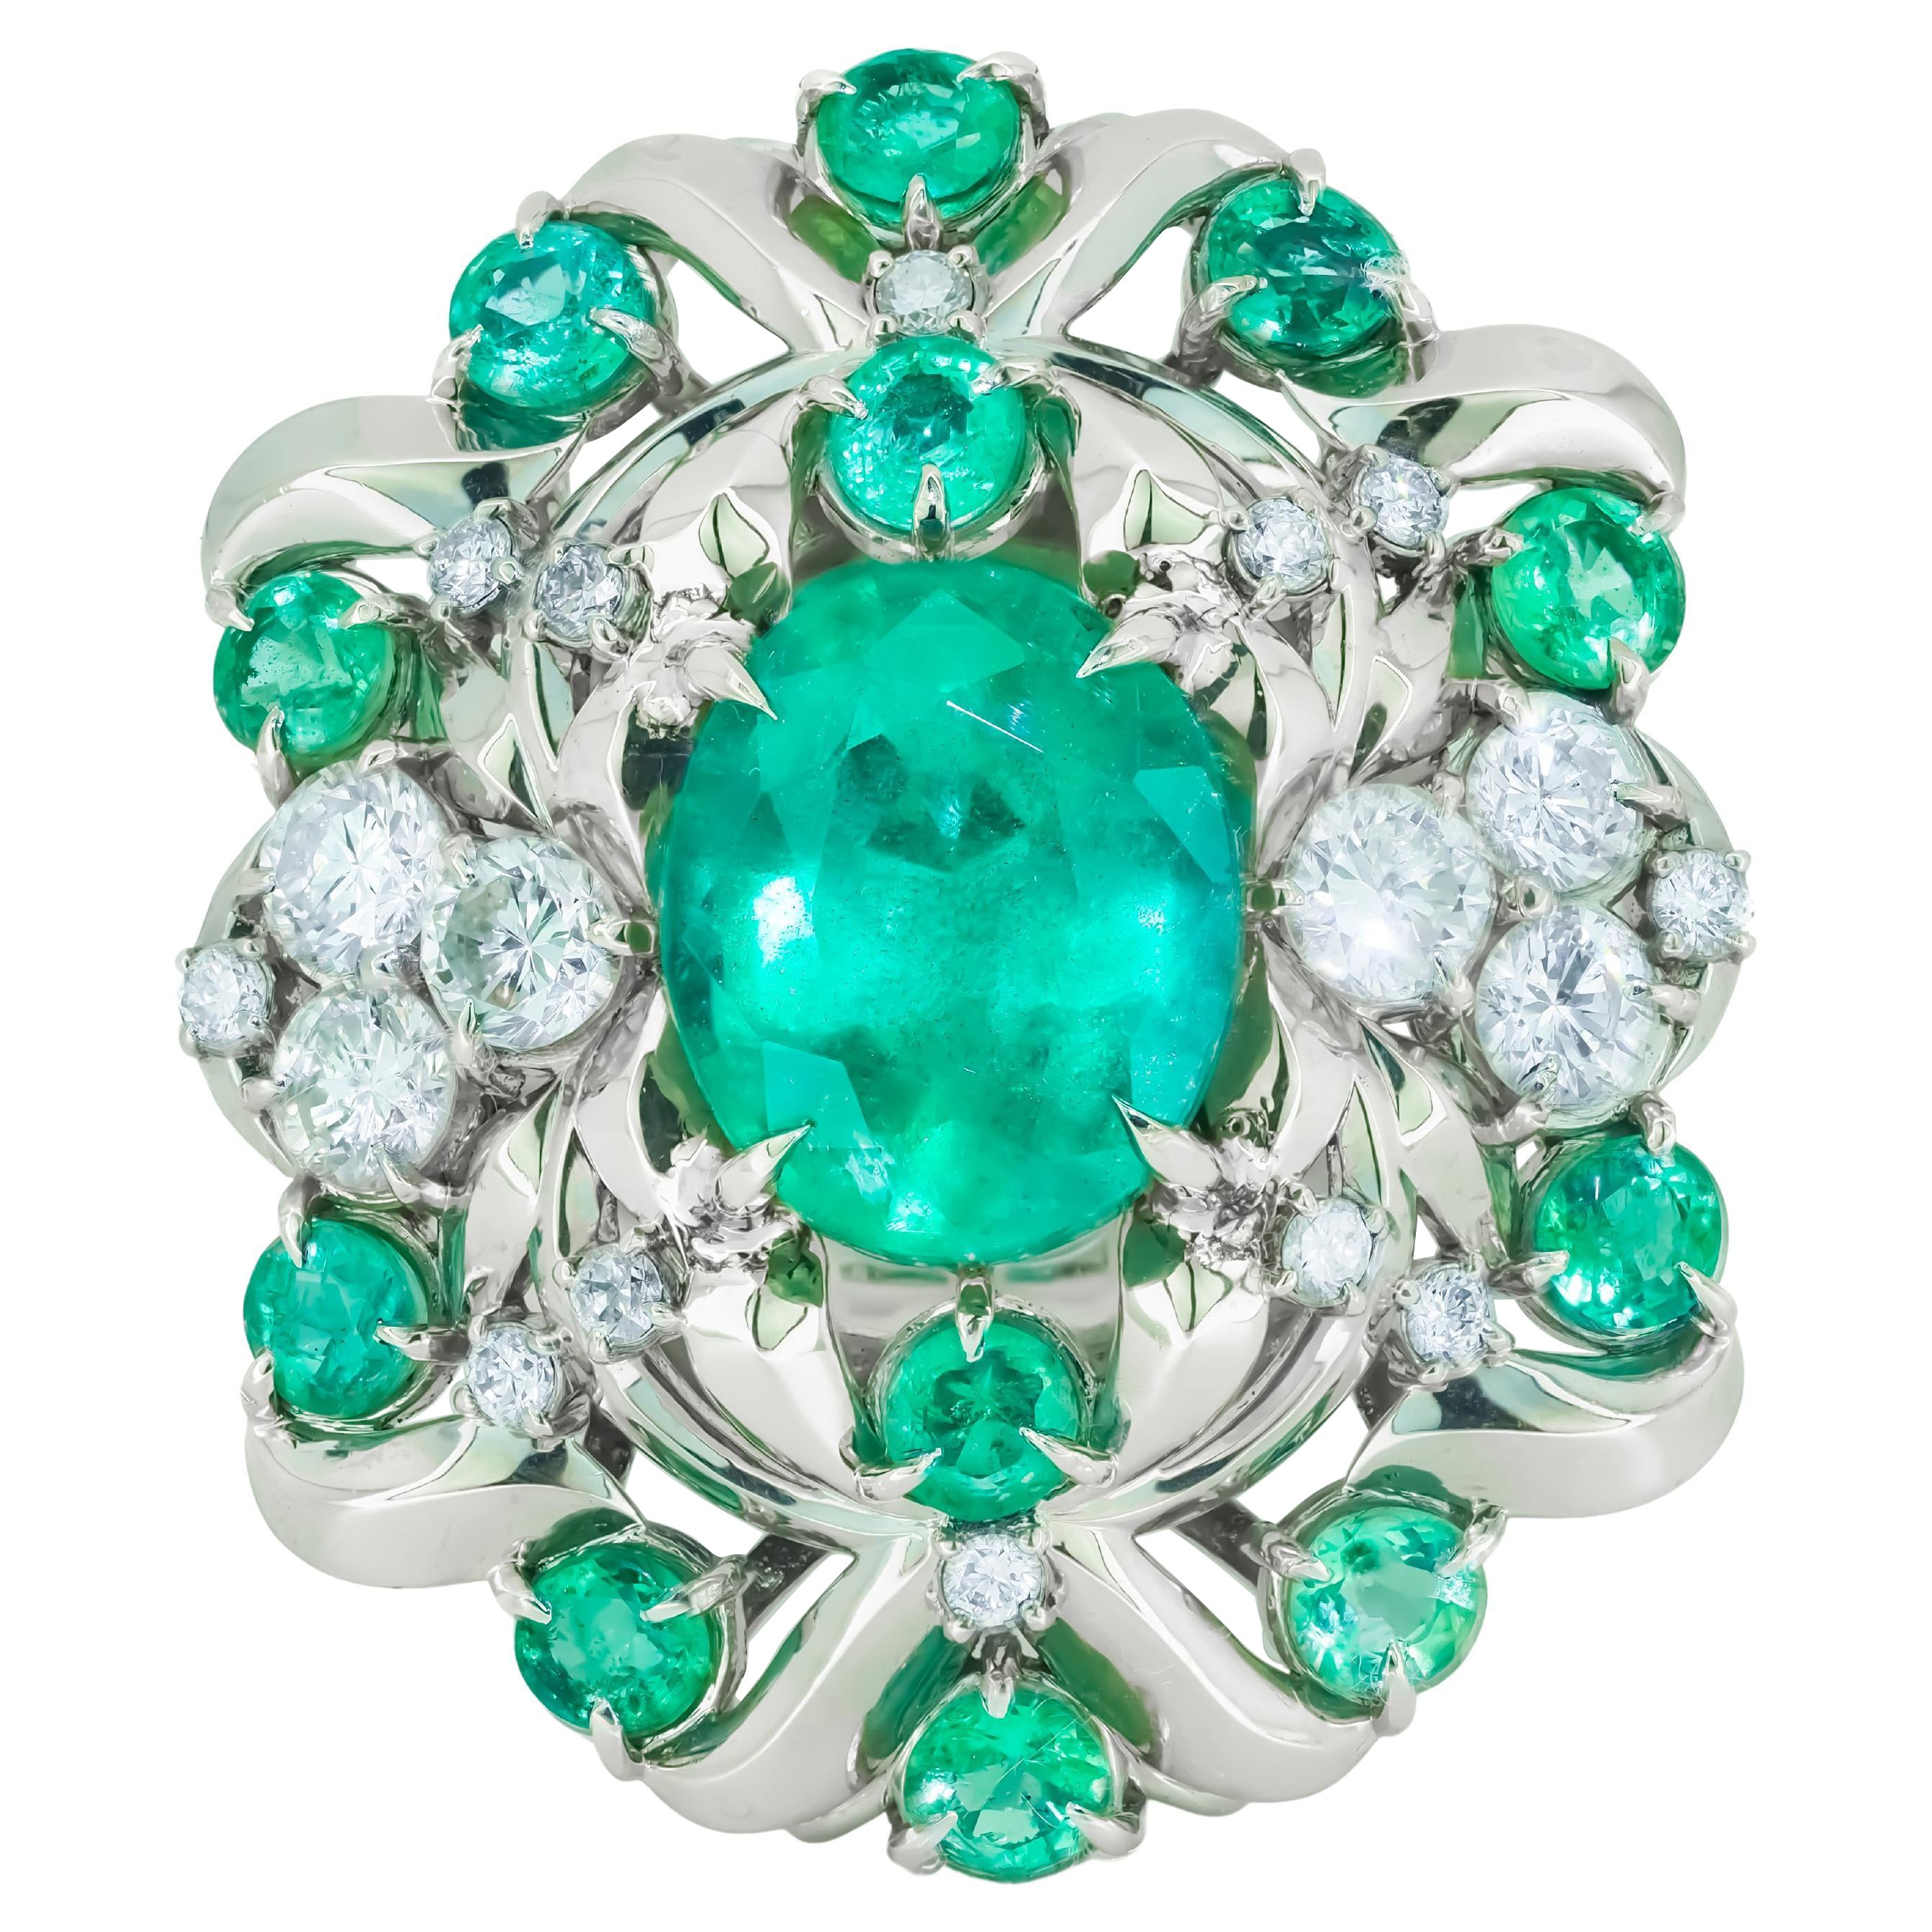 Emerald and Diamonds 14k Gold Ring, Certified Emerald Ring